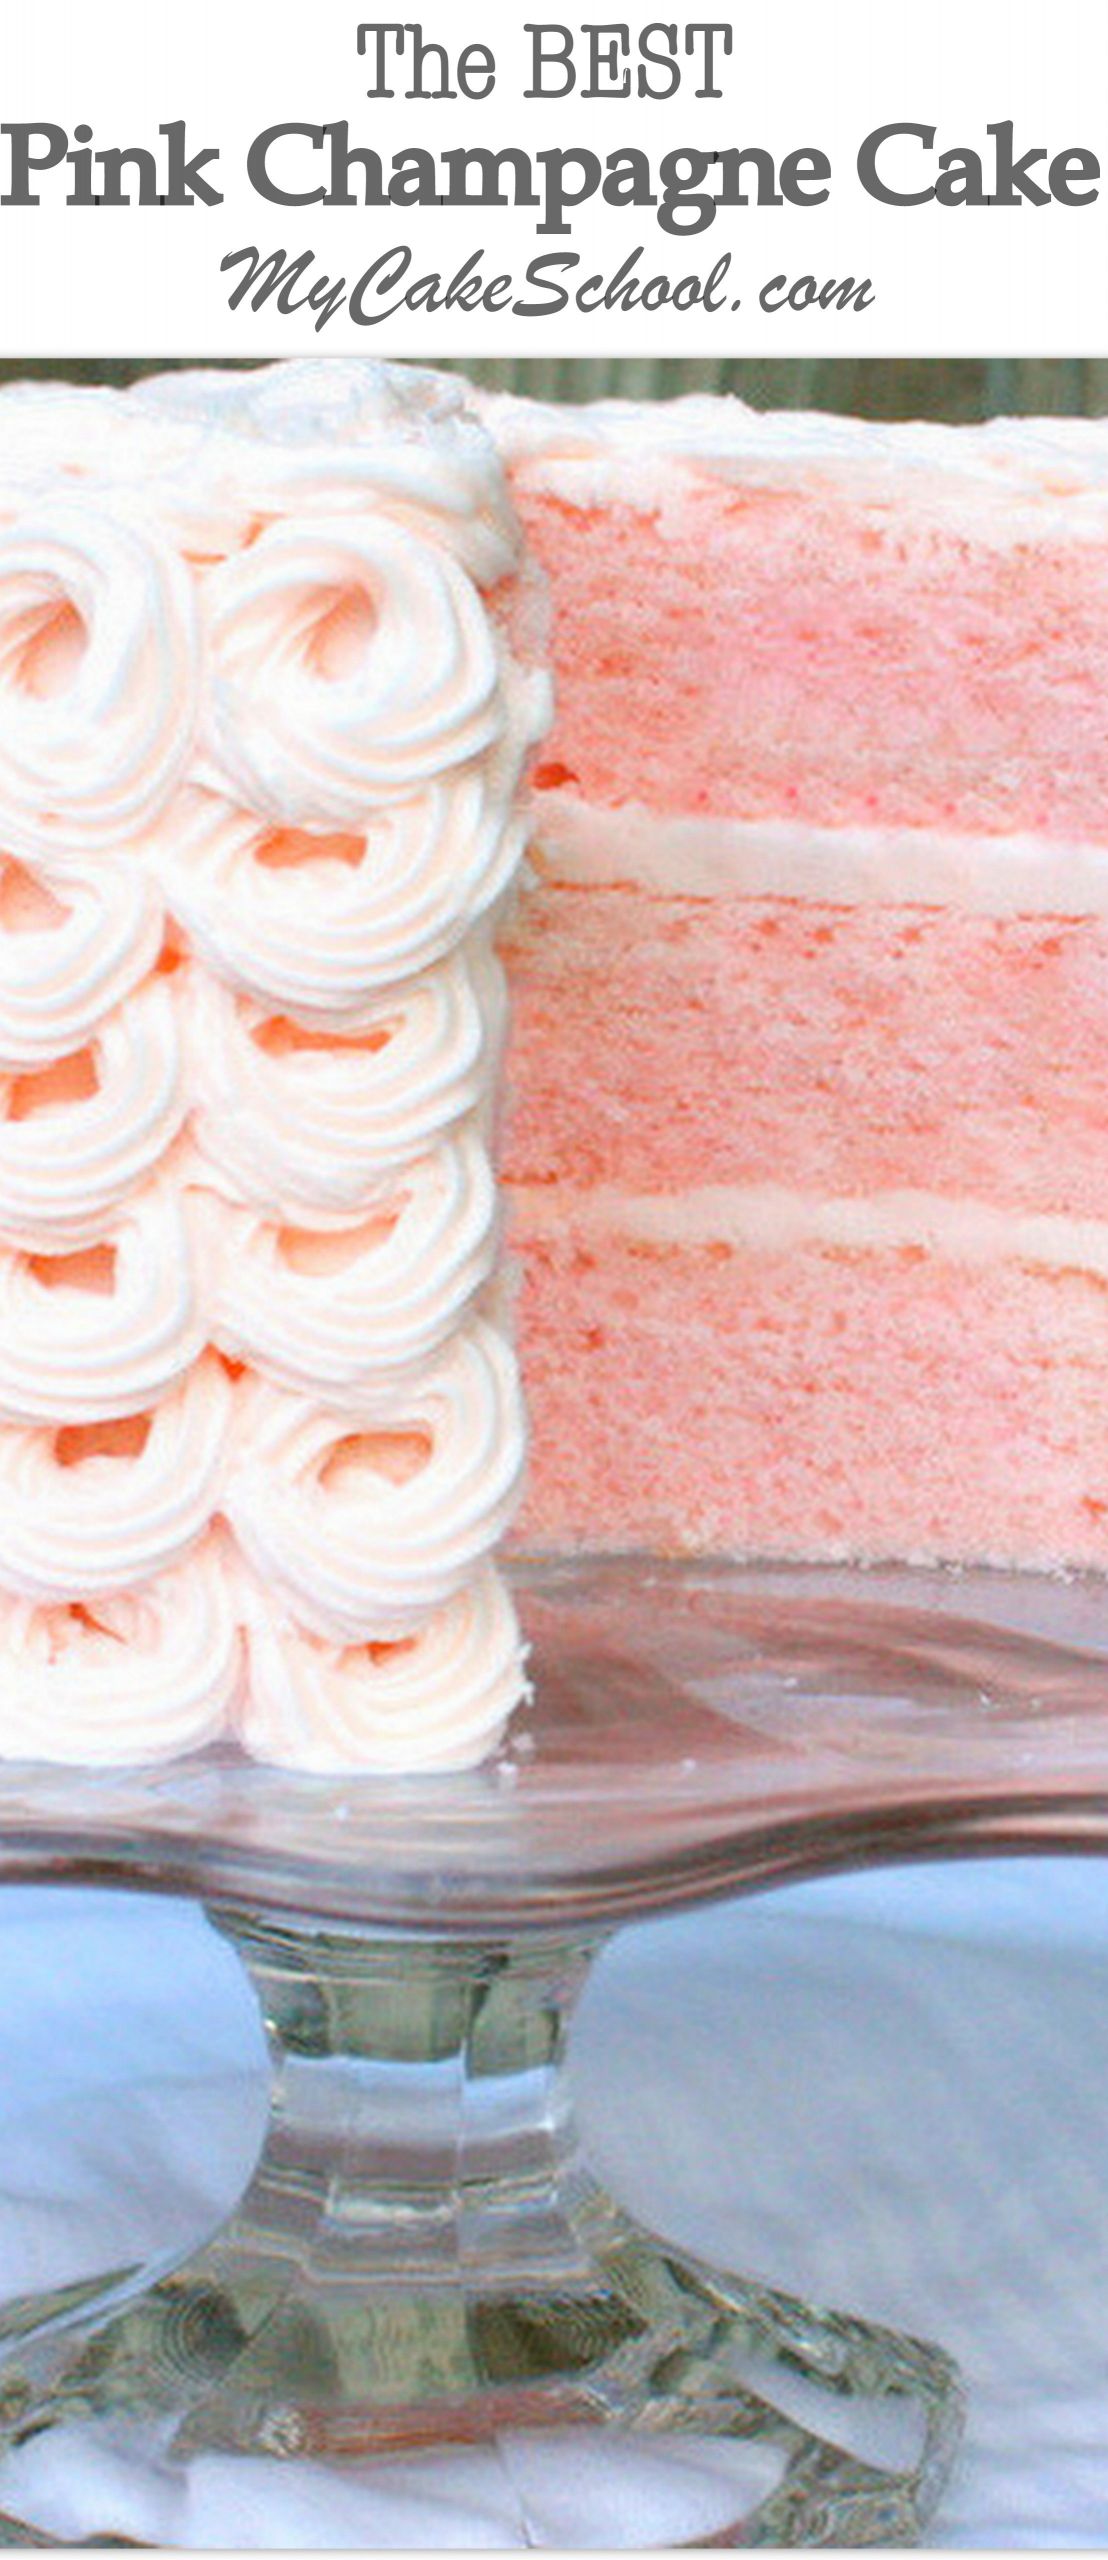 Bakery Cake Recipes
 Delicious Pink Champagne Cake Recipe from Scratch